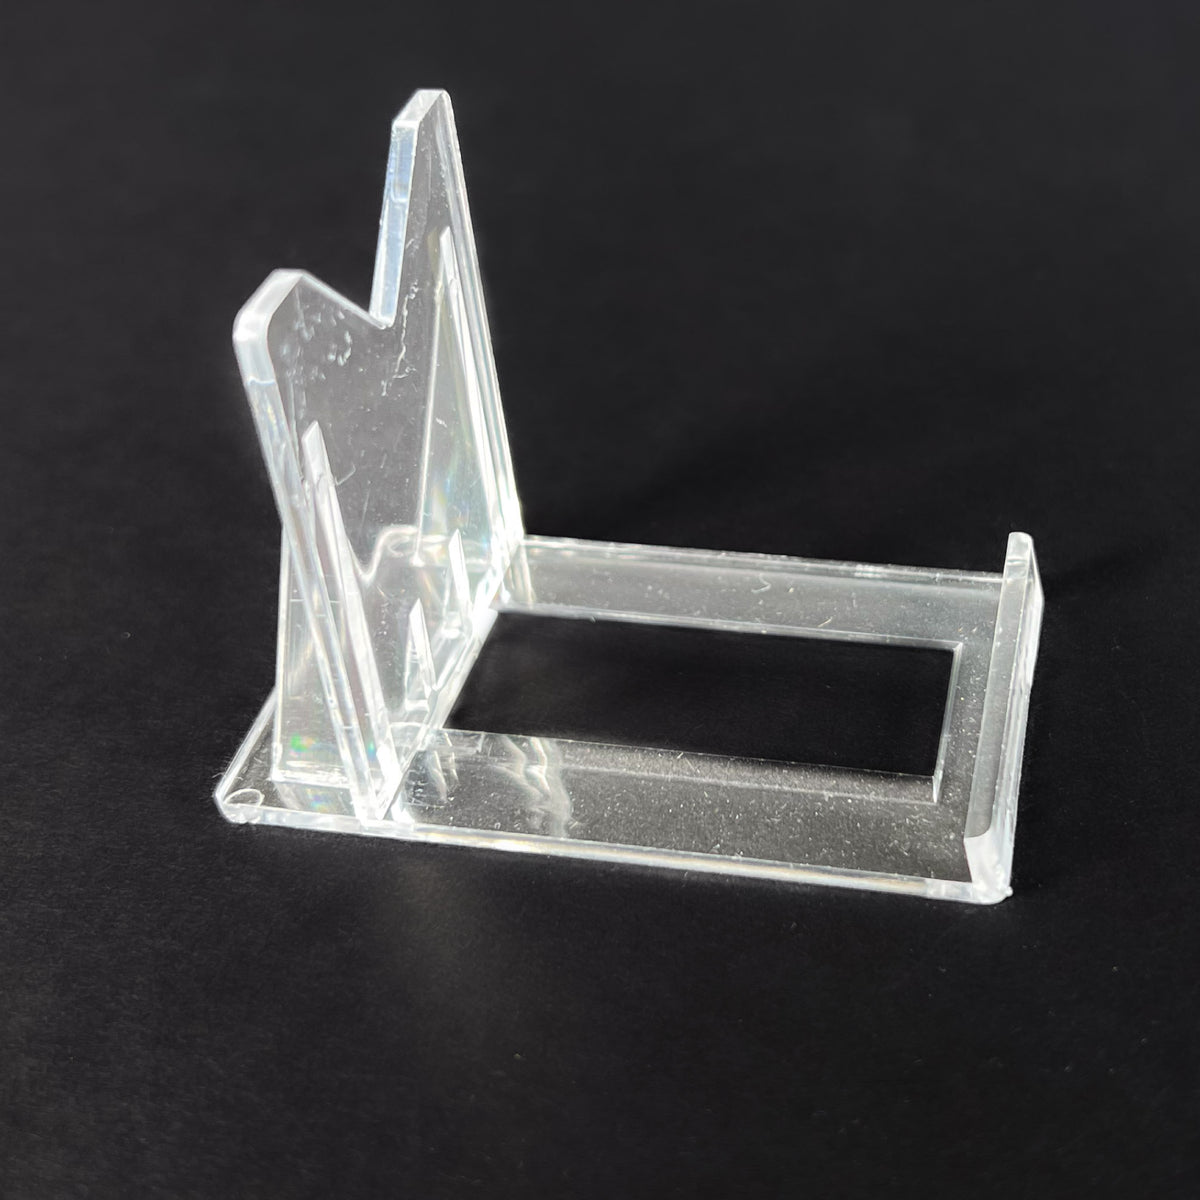 Adjustable 2 part Clear Acrylic Display Stand for Stones or Fossils